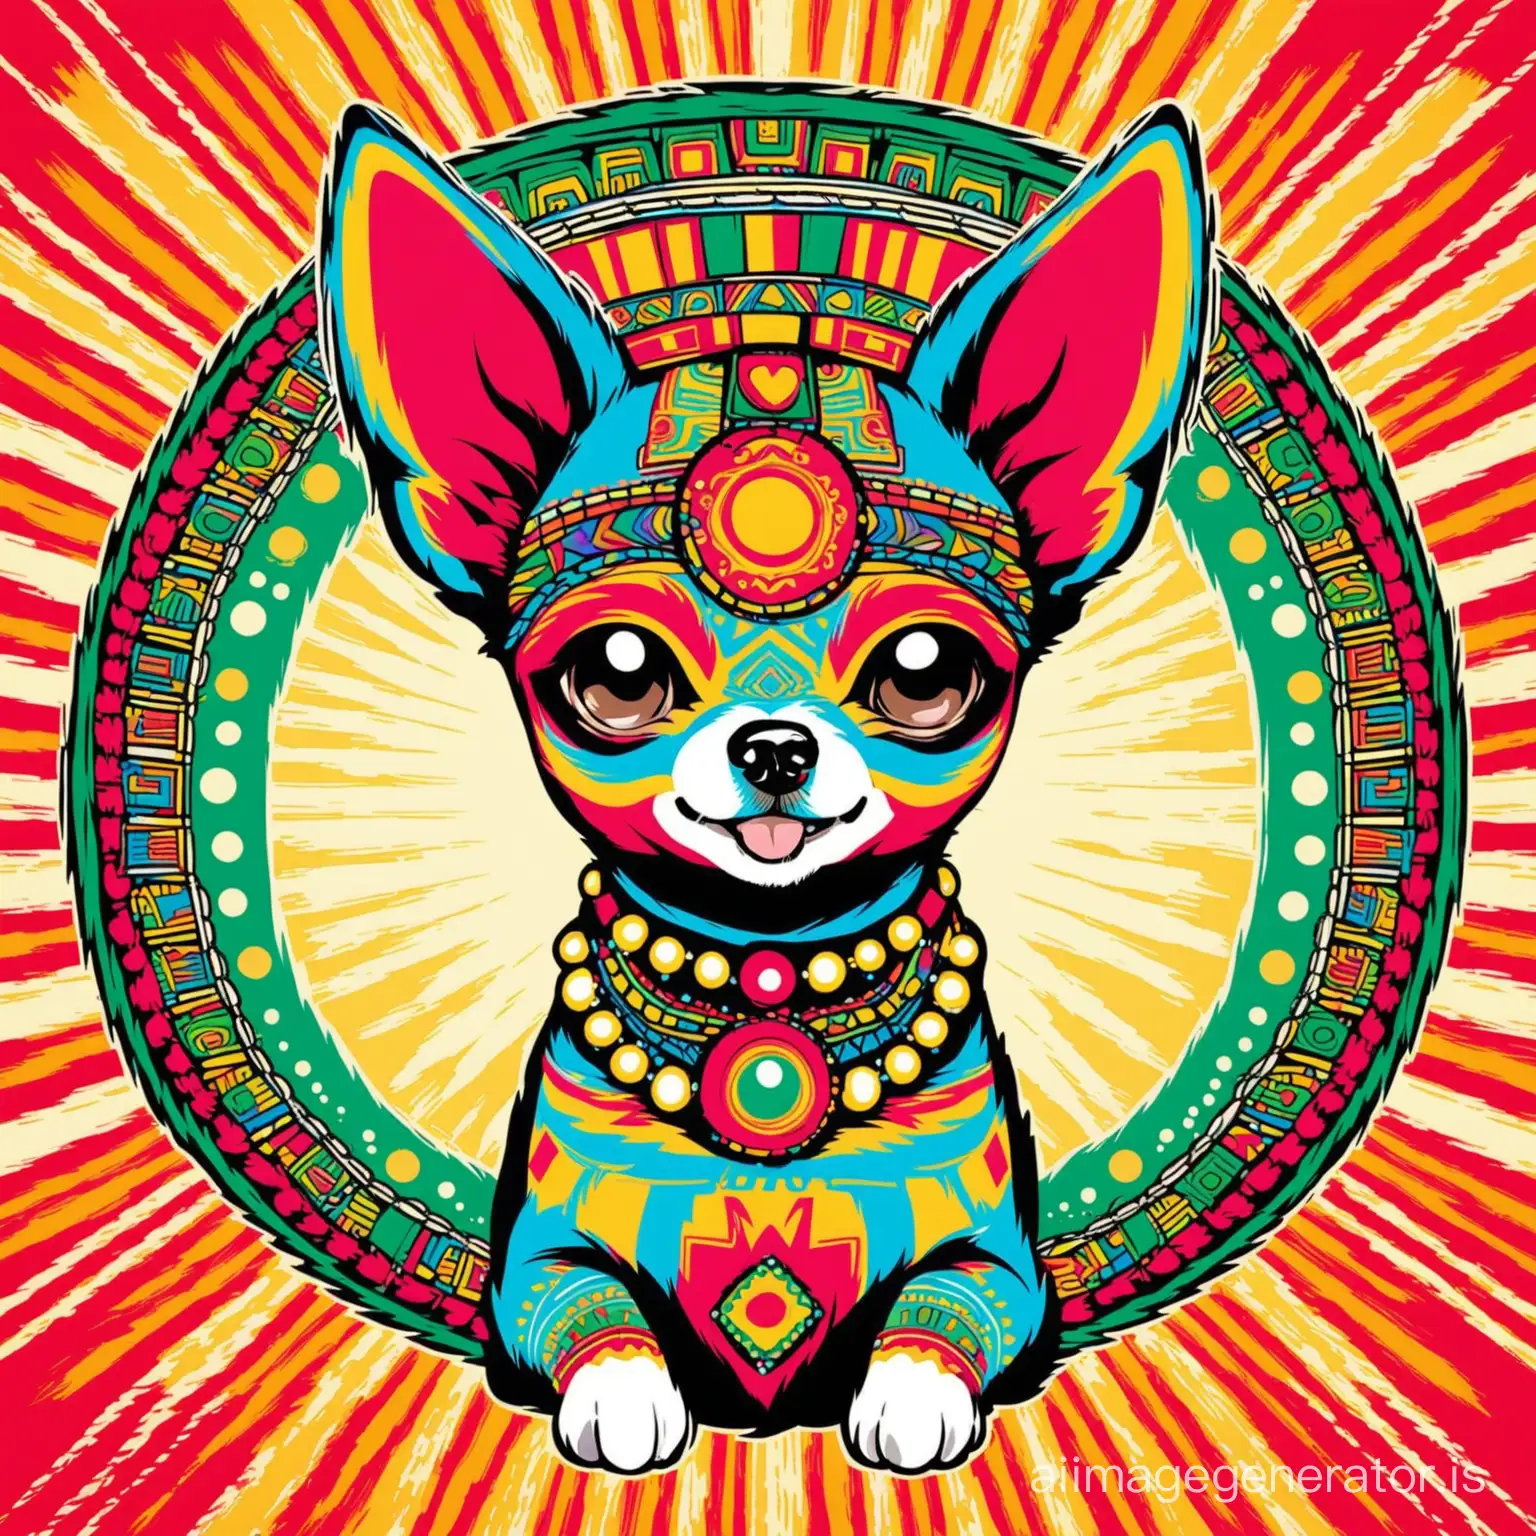 Mayan-Mexico-Chihuahua-in-Vibrant-Pop-Art-Style